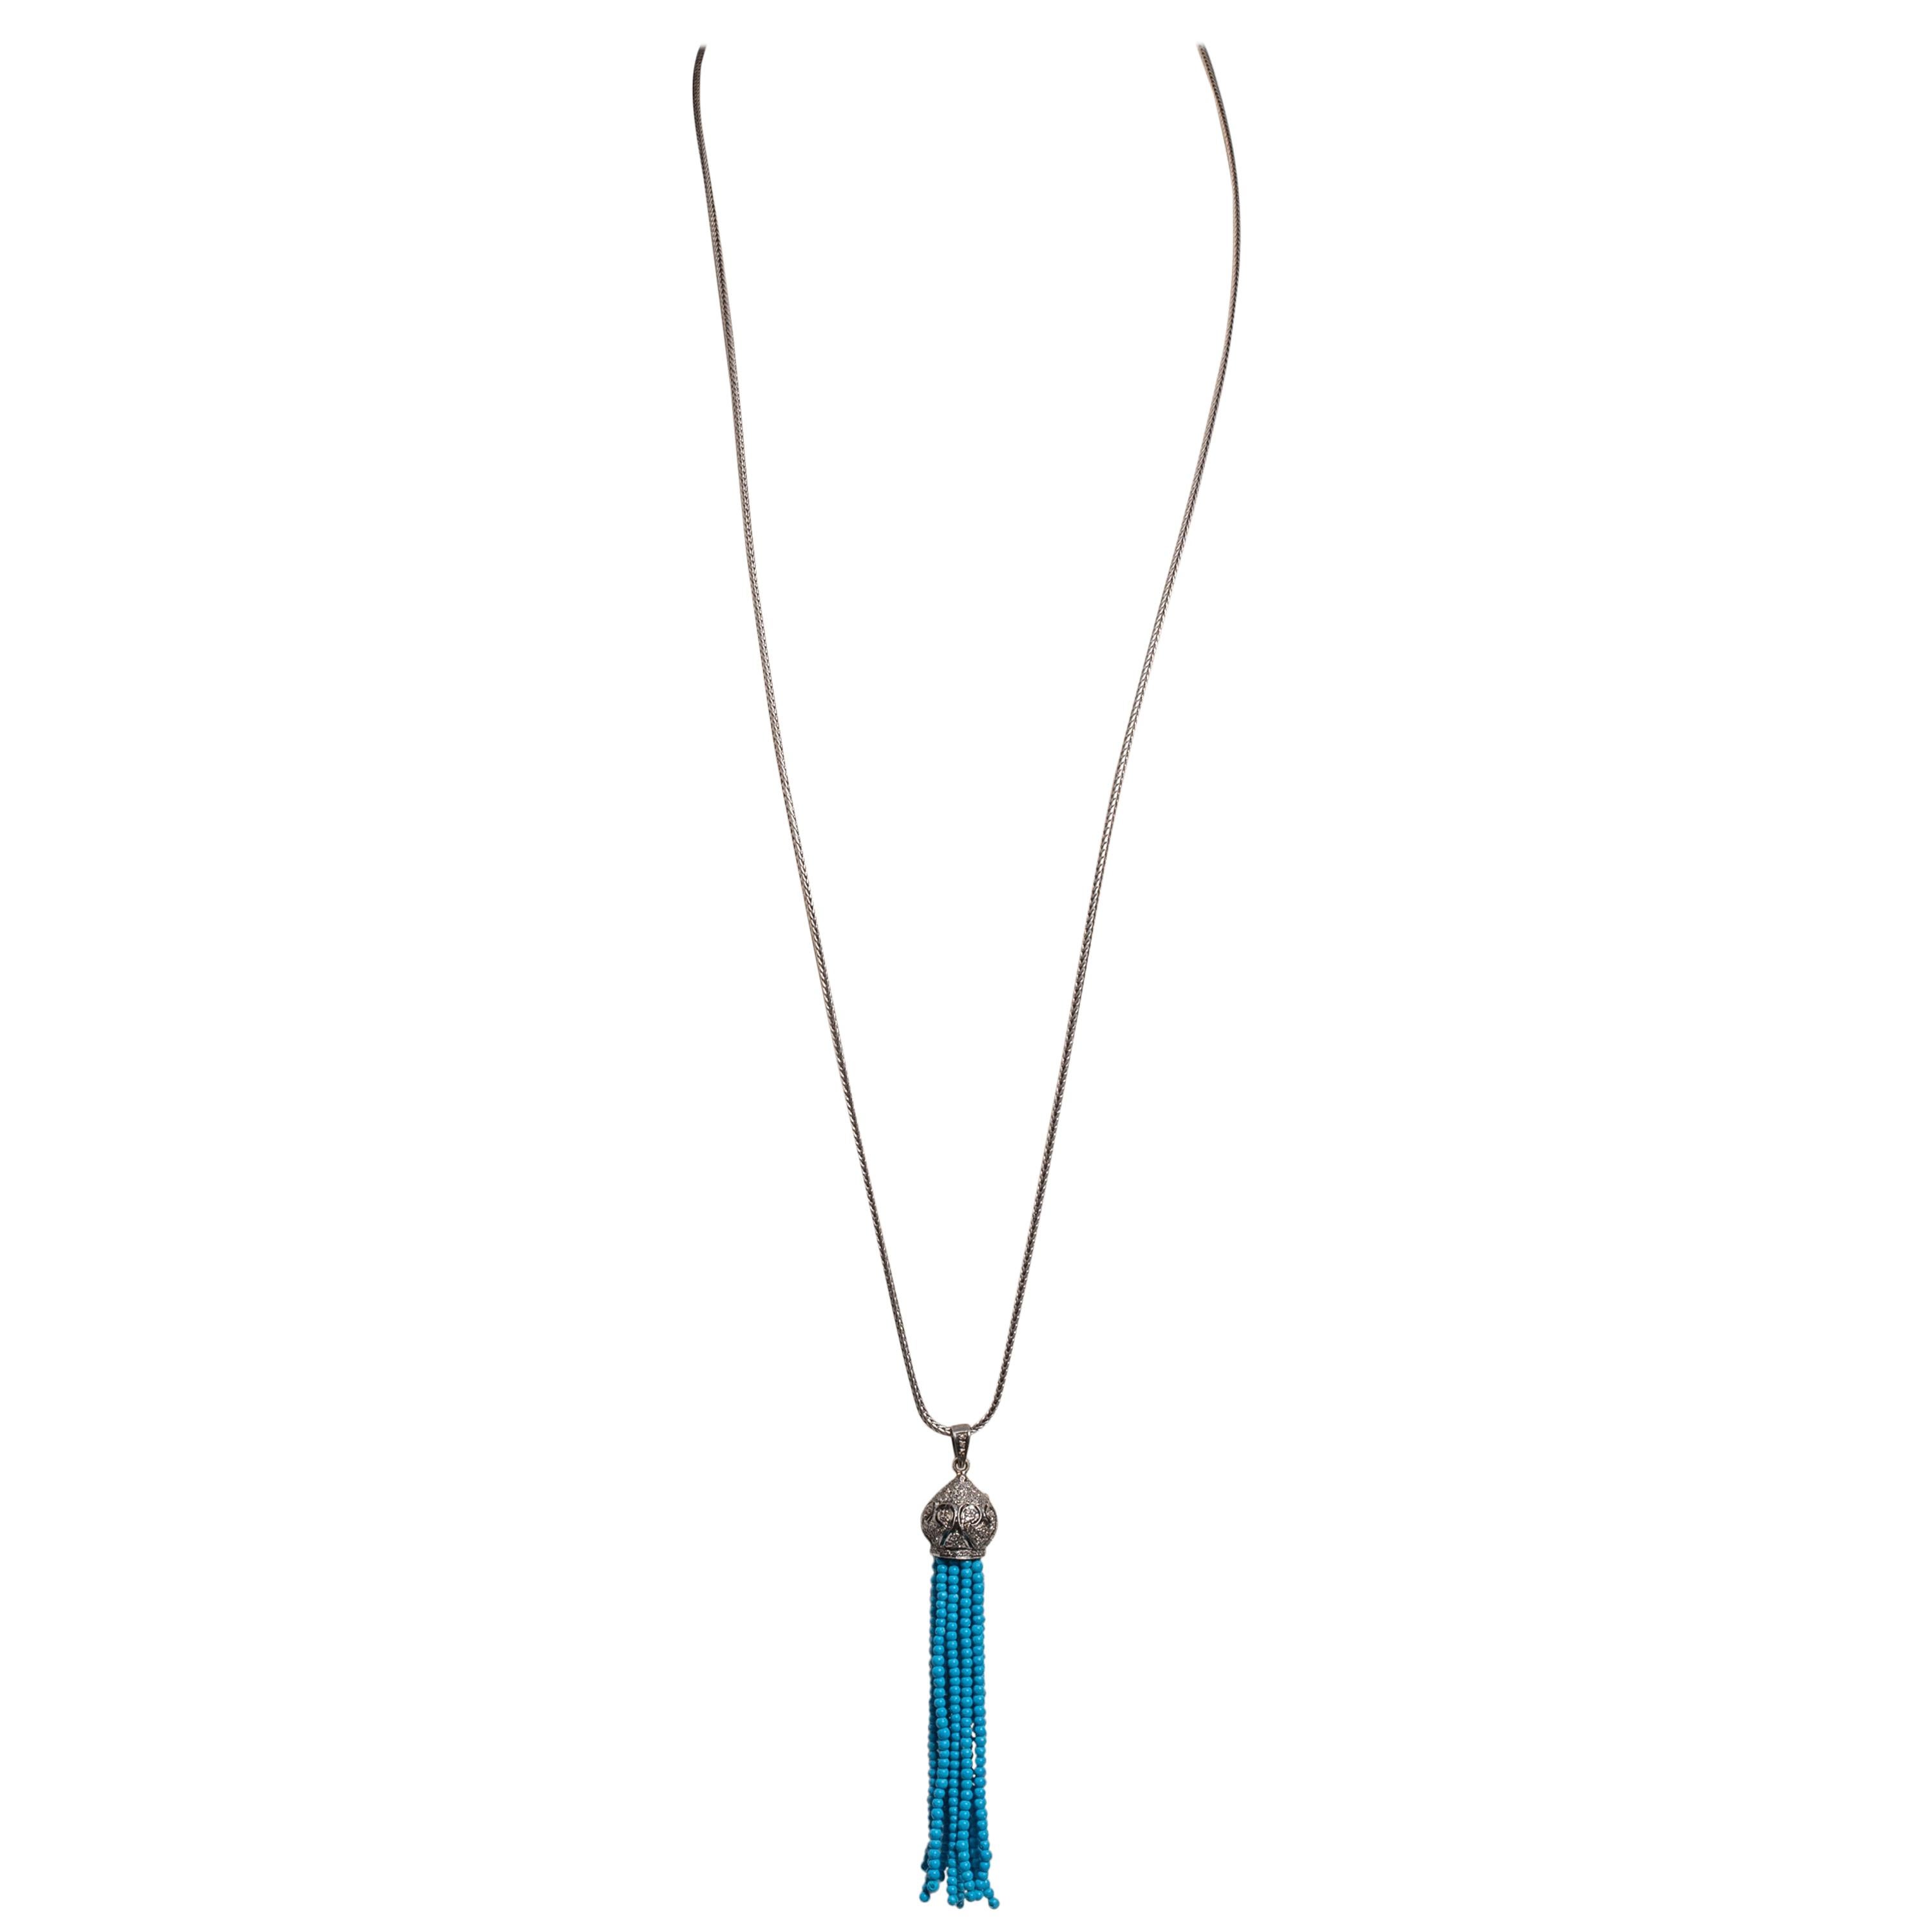 A long, beaded turquoise and diamond tassel pendant on a long sterling silver hand-made chain.  Diamonds on the bail as well.  Diamonds are round, brilliant cut in a pave` setting. Just the chain is 36 inches long and could be doubled to allow for a